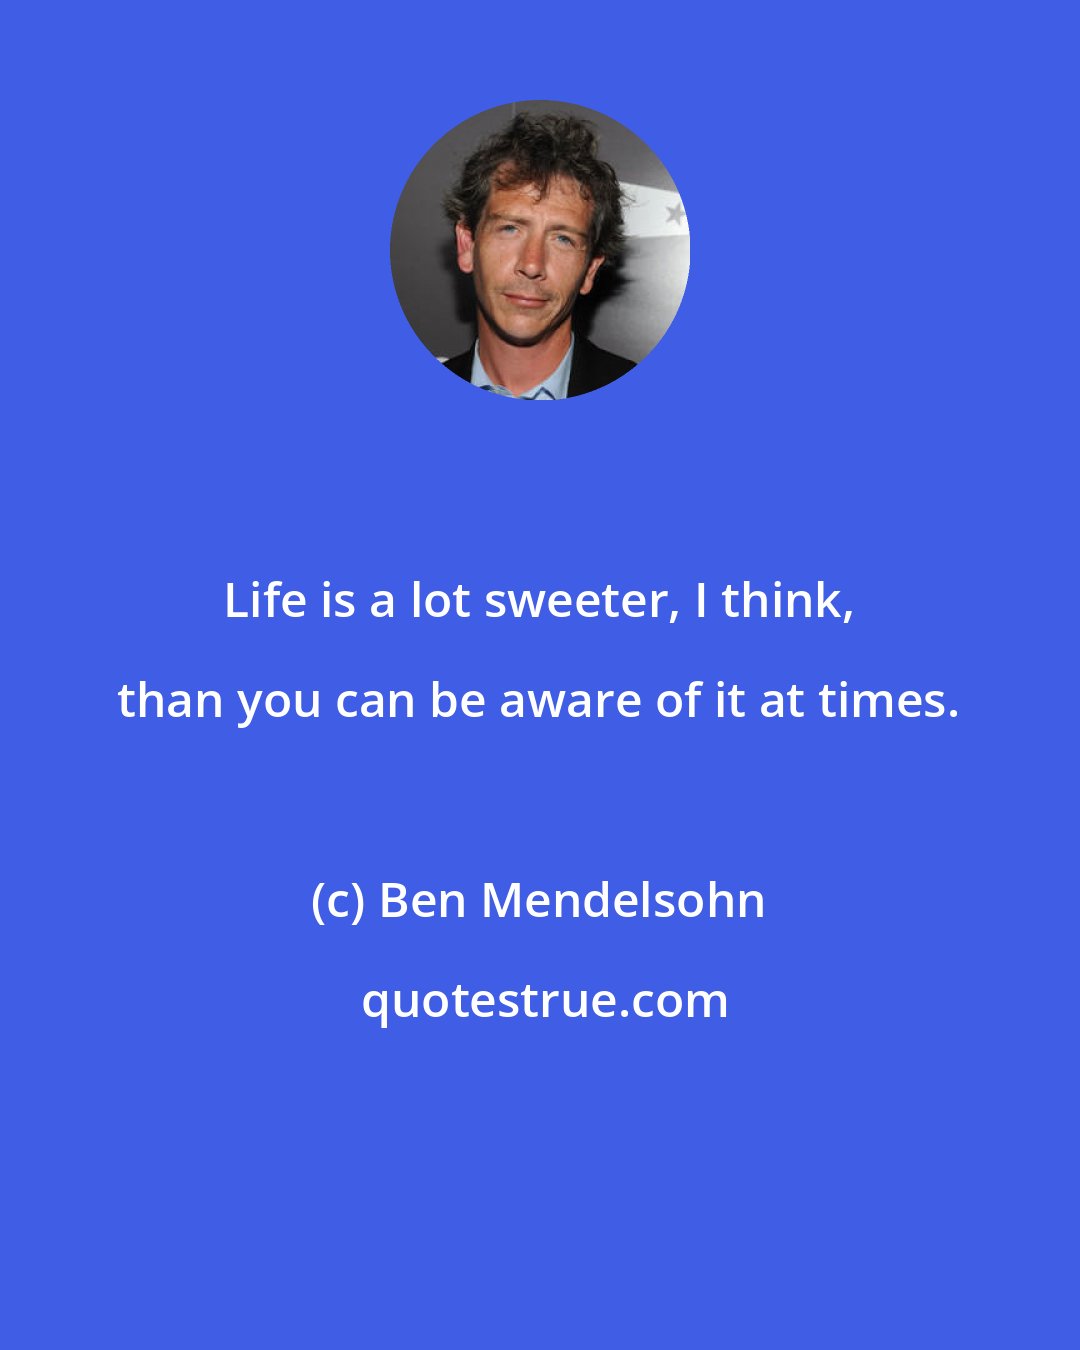 Ben Mendelsohn: Life is a lot sweeter, I think, than you can be aware of it at times.